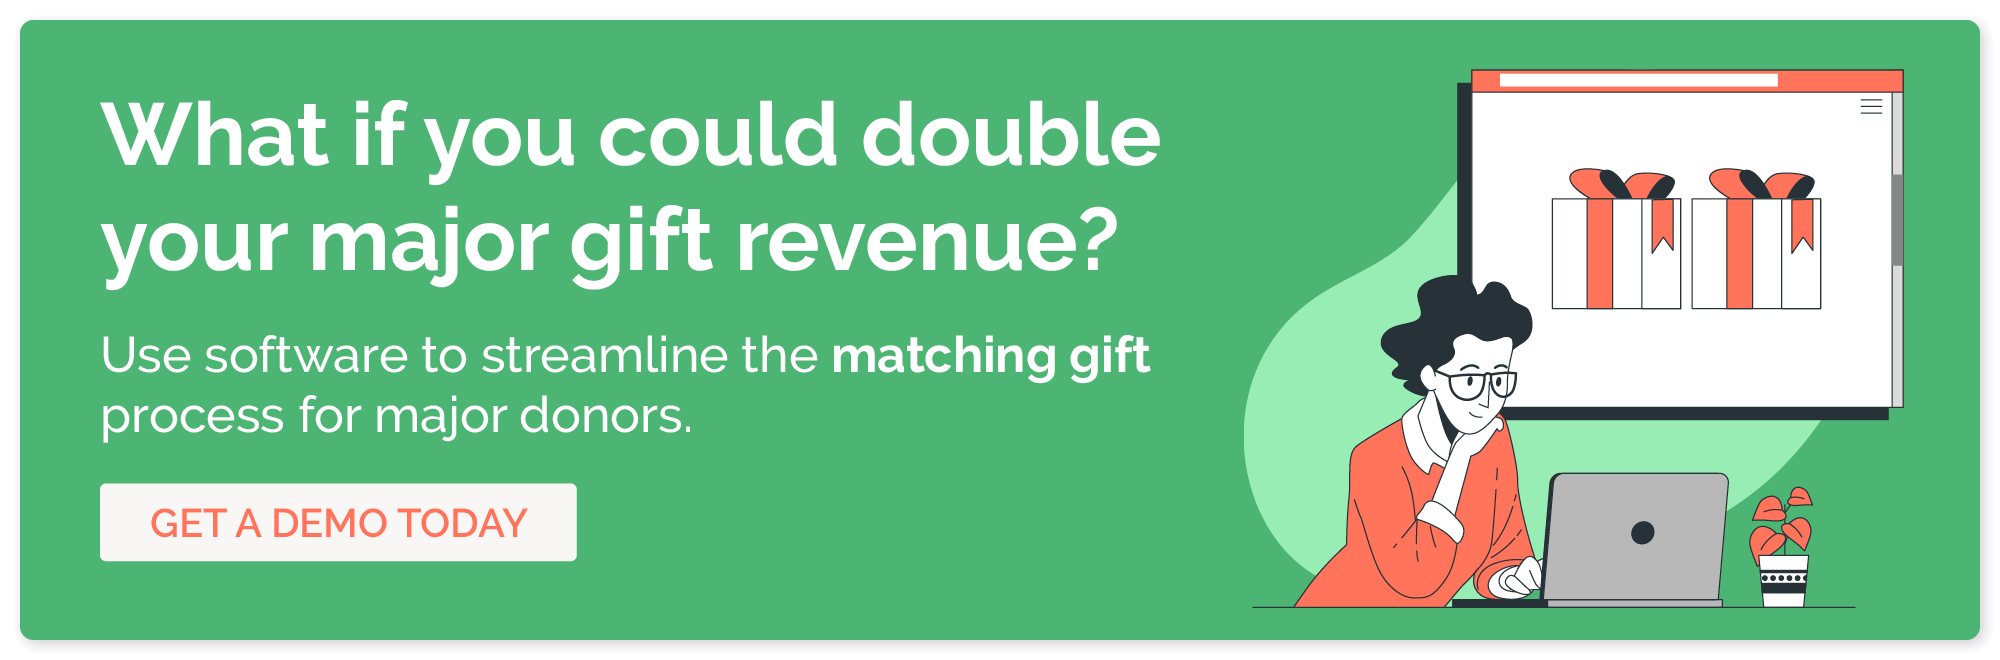 Get a demo of matching gift software to double your major gift revenue.